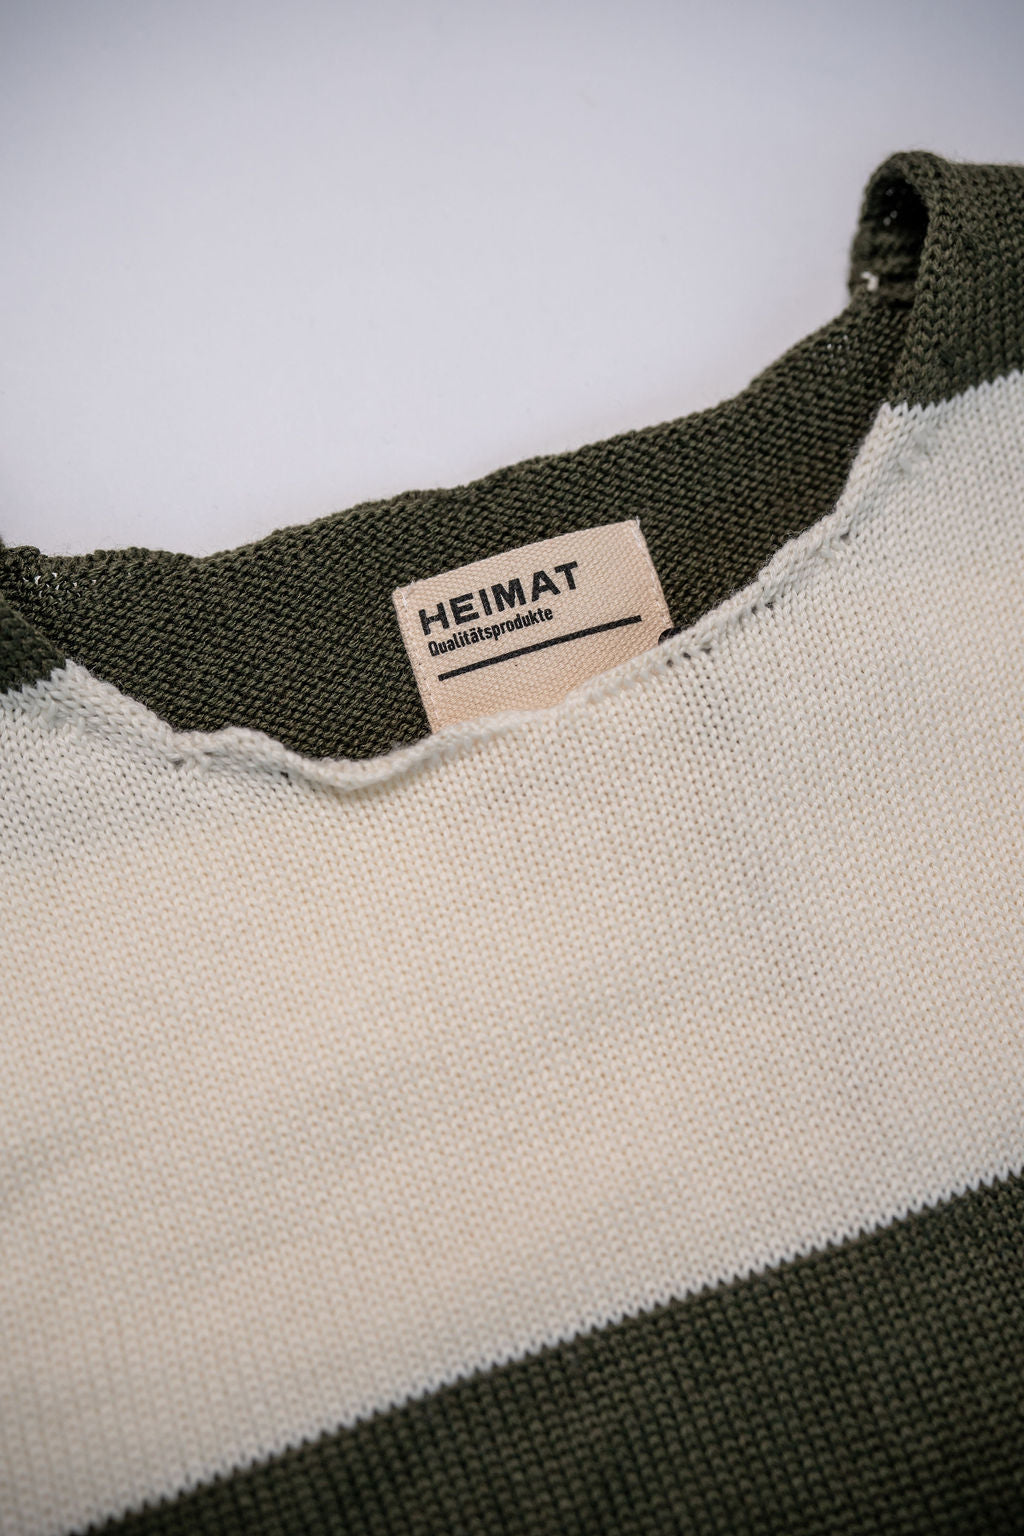 Heimat Textil Rugby Harbor Sweater - Seashell/Military Green